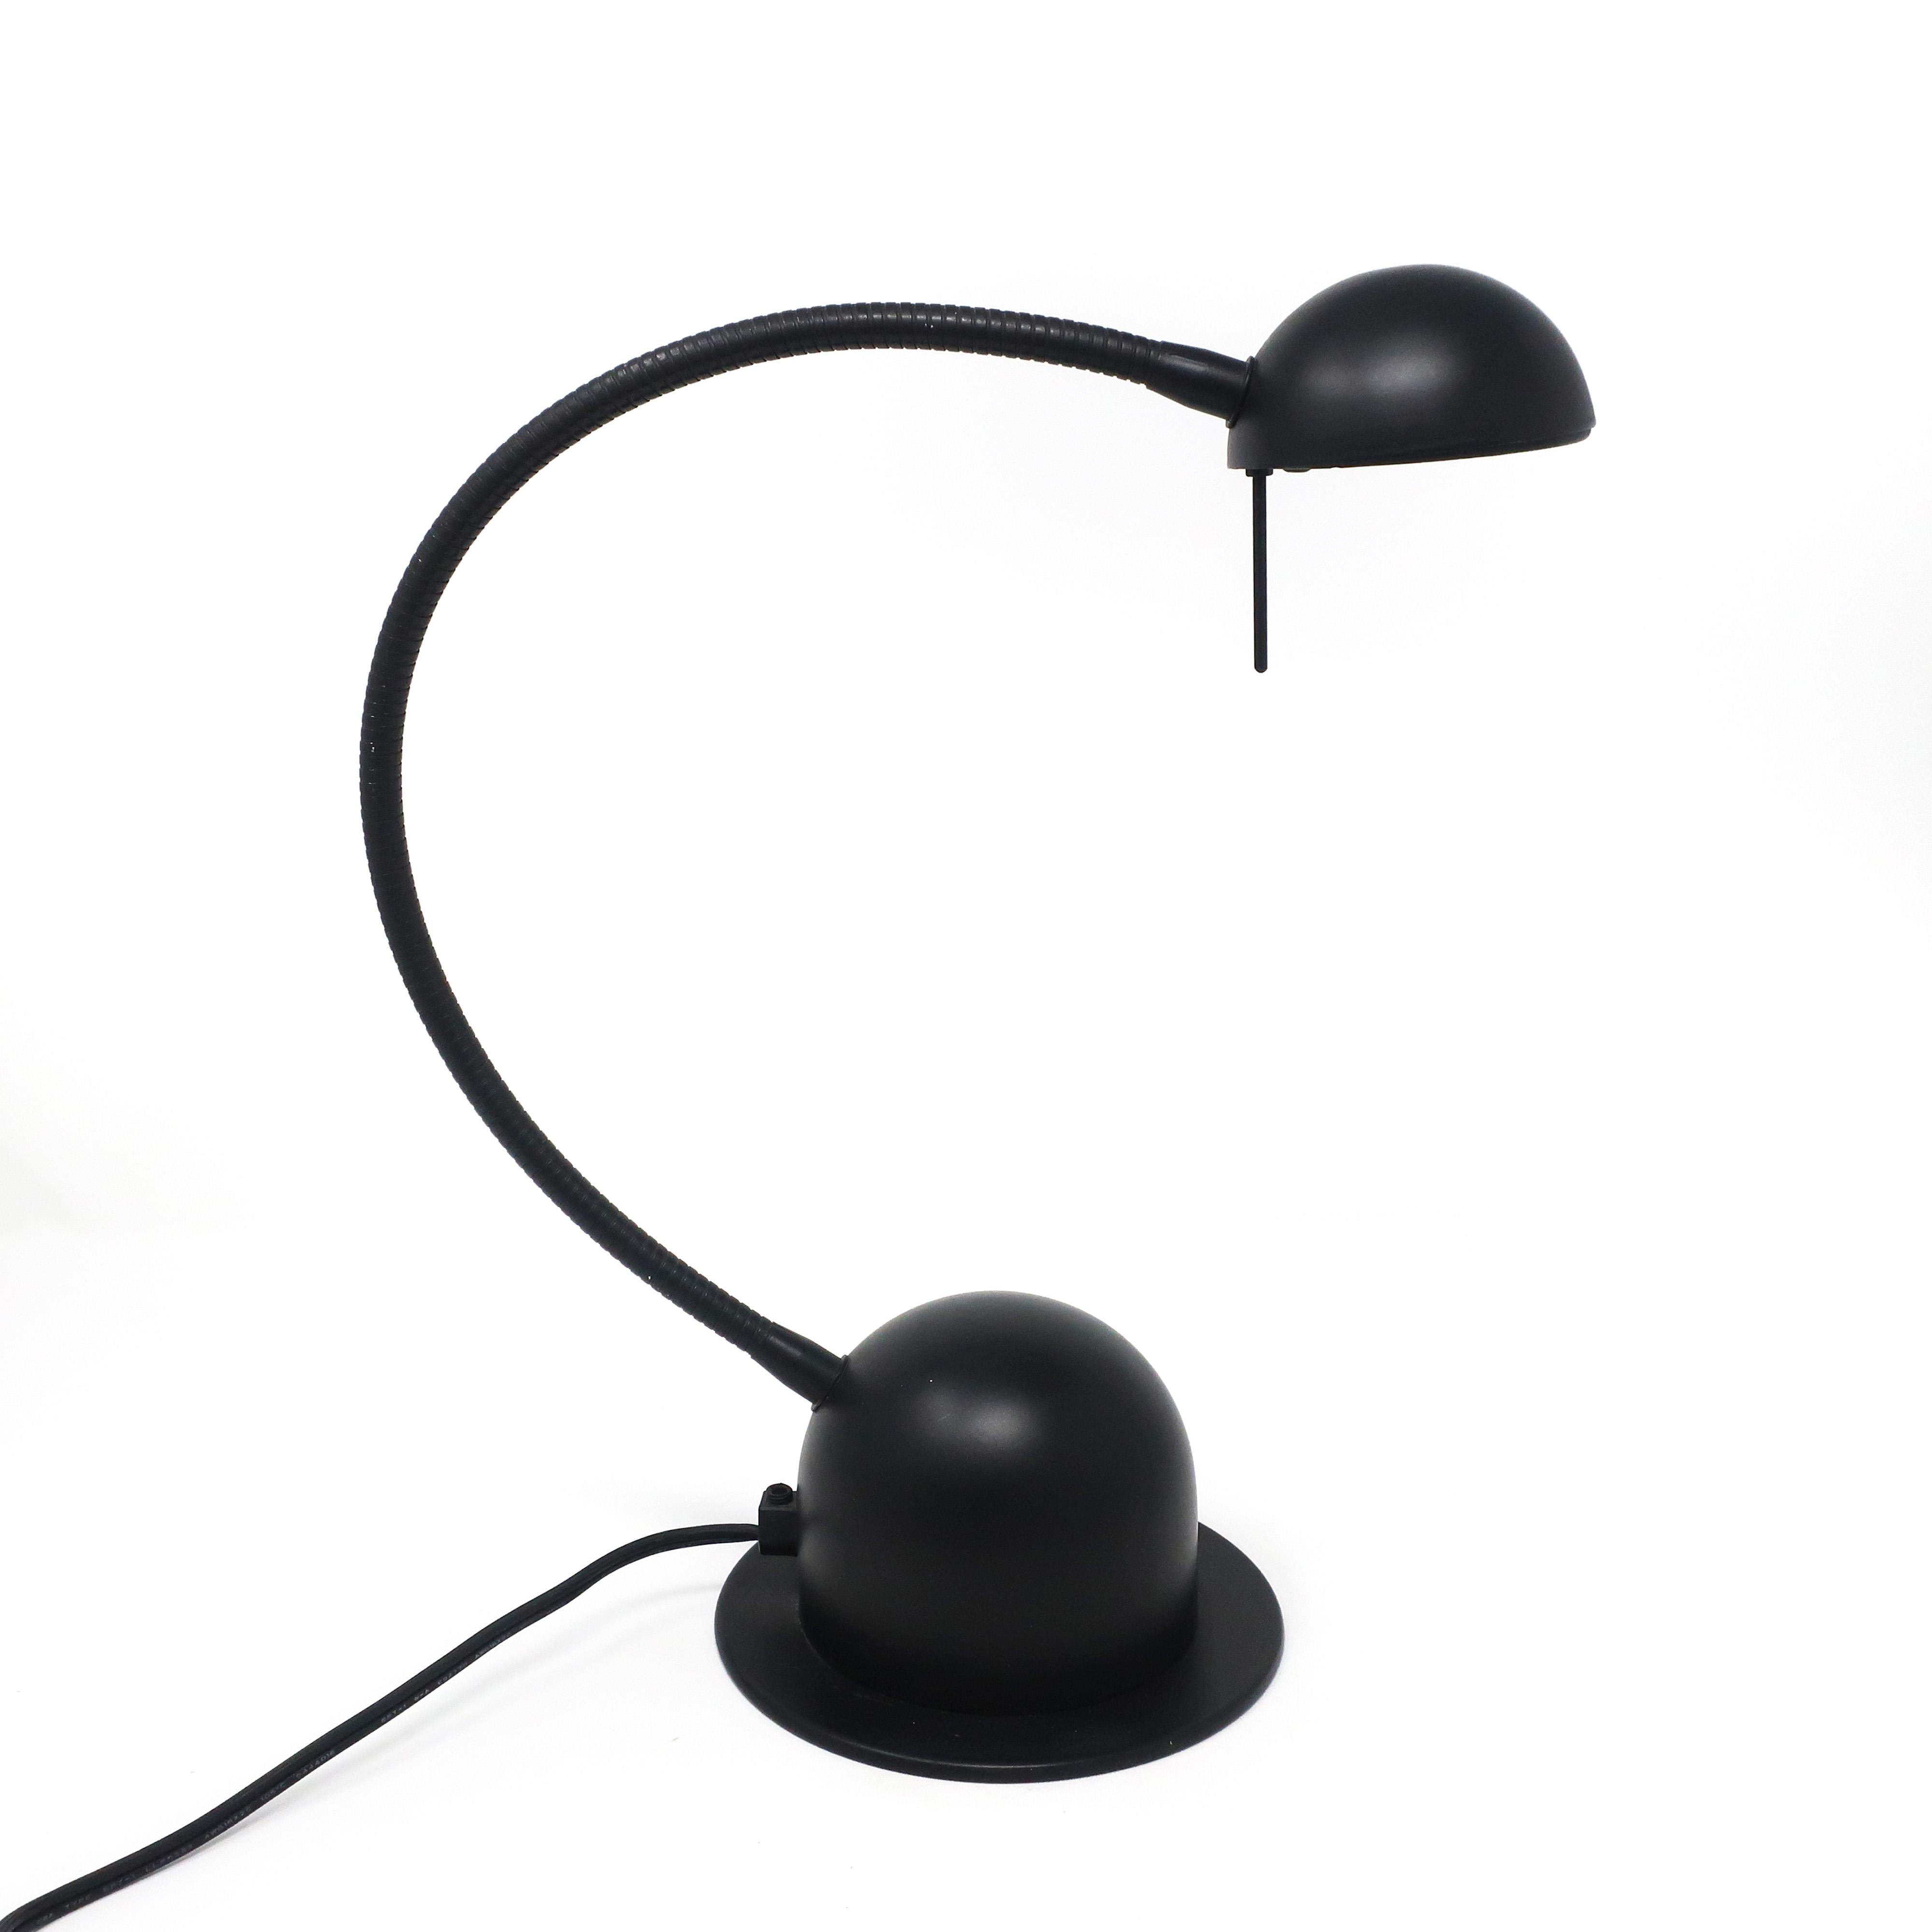 A Minimalist 1980s postmodern Veneta Lumi desk lamp with spherical black base and shade and black gooseneck. Switch is on the cord. In excellent vintage condition.

Measures: 6” x 6” x 13”, extends to 21”.